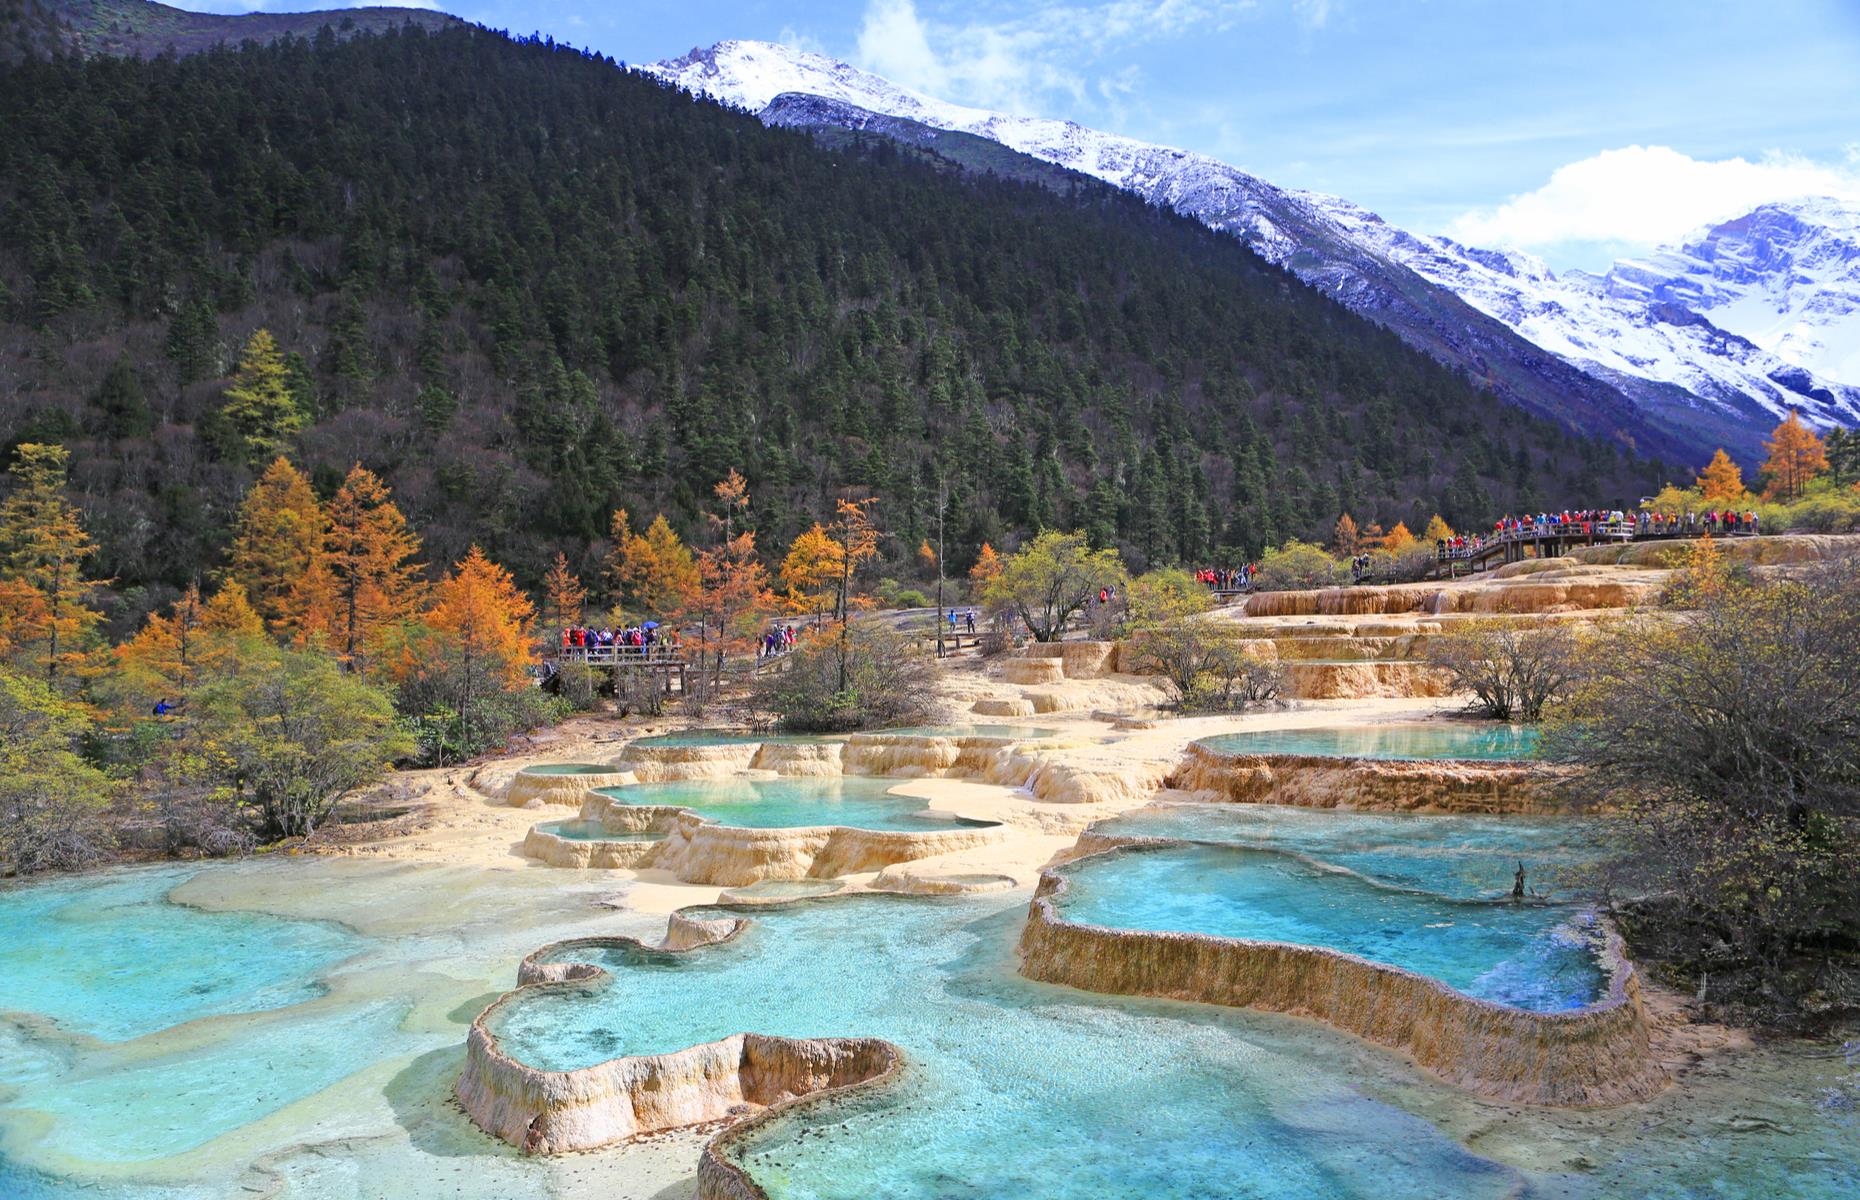 In China’s Huanglong Valley, hot spring water cascades down a series of intensely aquamarine terraced pools, creating a breathtaking spectacle. Formed from calcium carbonate, the ponds and lakes stretch for over two miles through the valley, which is home to giant pandas and the Sichuan golden snub-nosed monkey. You can't bathe here, but you'll see why Huanglong is known as 'Fairyland on Earth.' Visit in October to see it at its most beautiful.